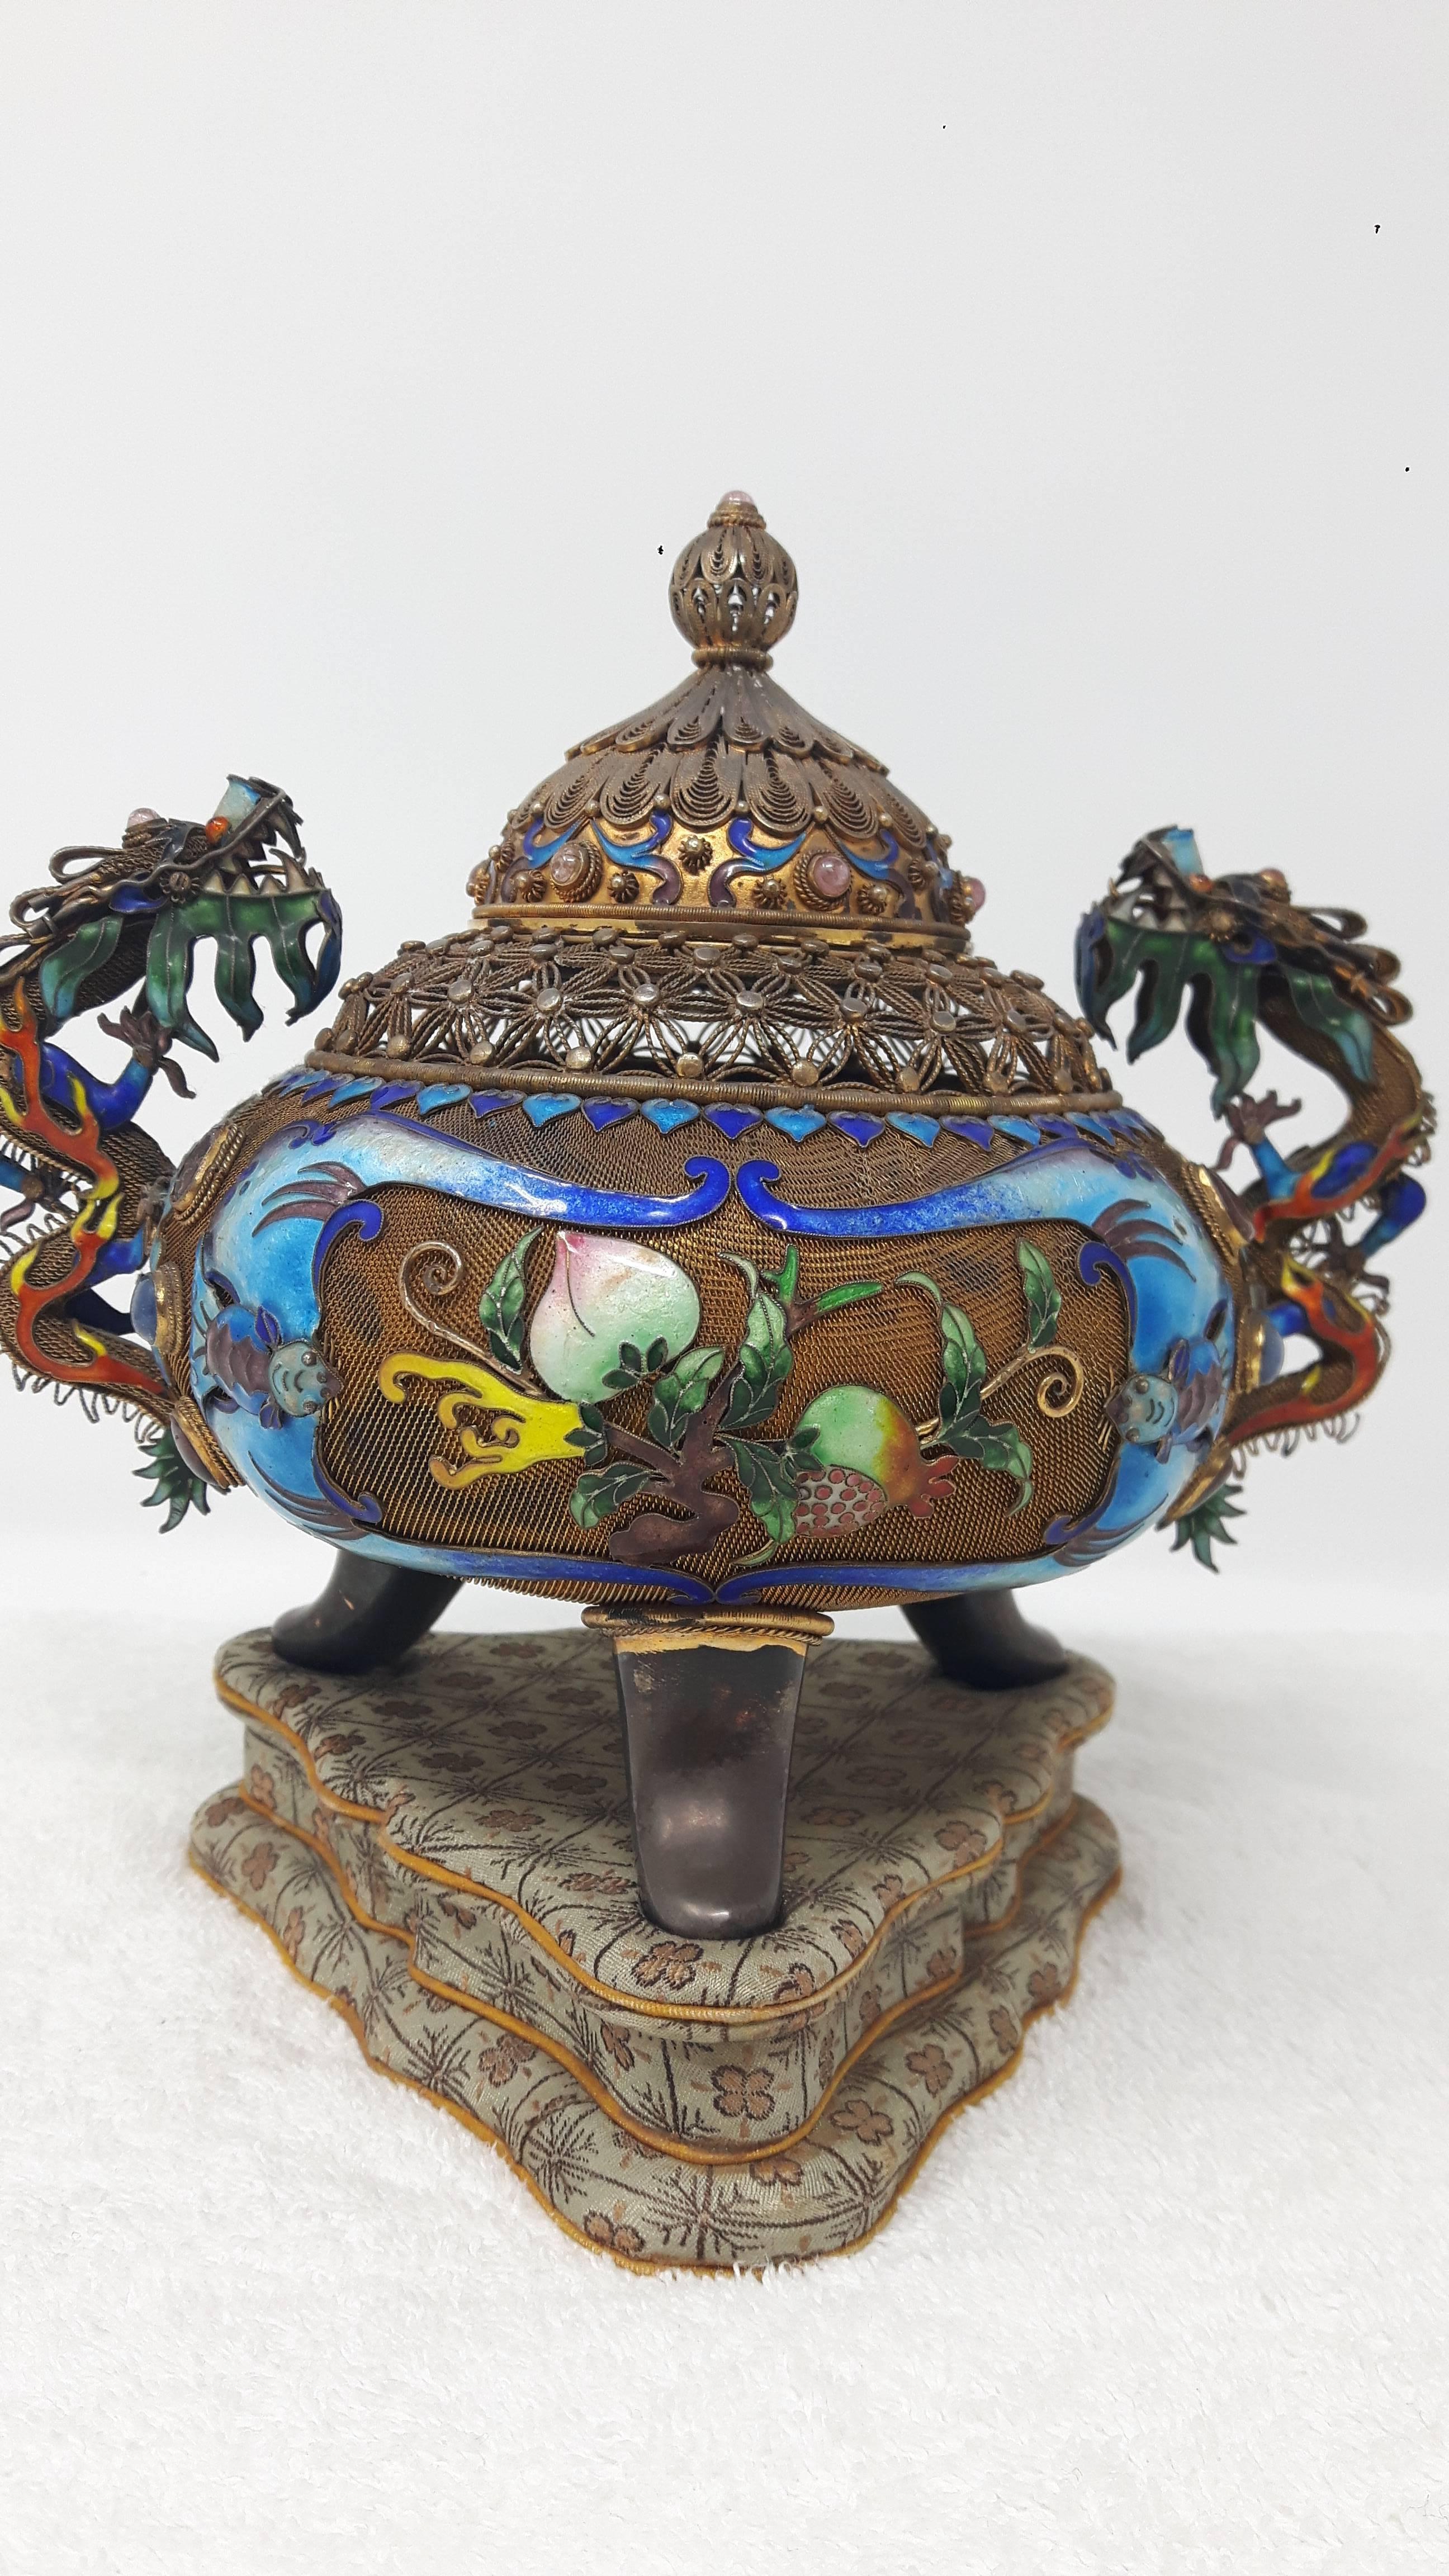 Early 20th century
Of bombé form and raised on tripod feet with applied dragon handles and basket-work filigree neck, the body enamelled with finger citron, peach and pomegranate within an enamelled double-bat framing and with applied cabochon